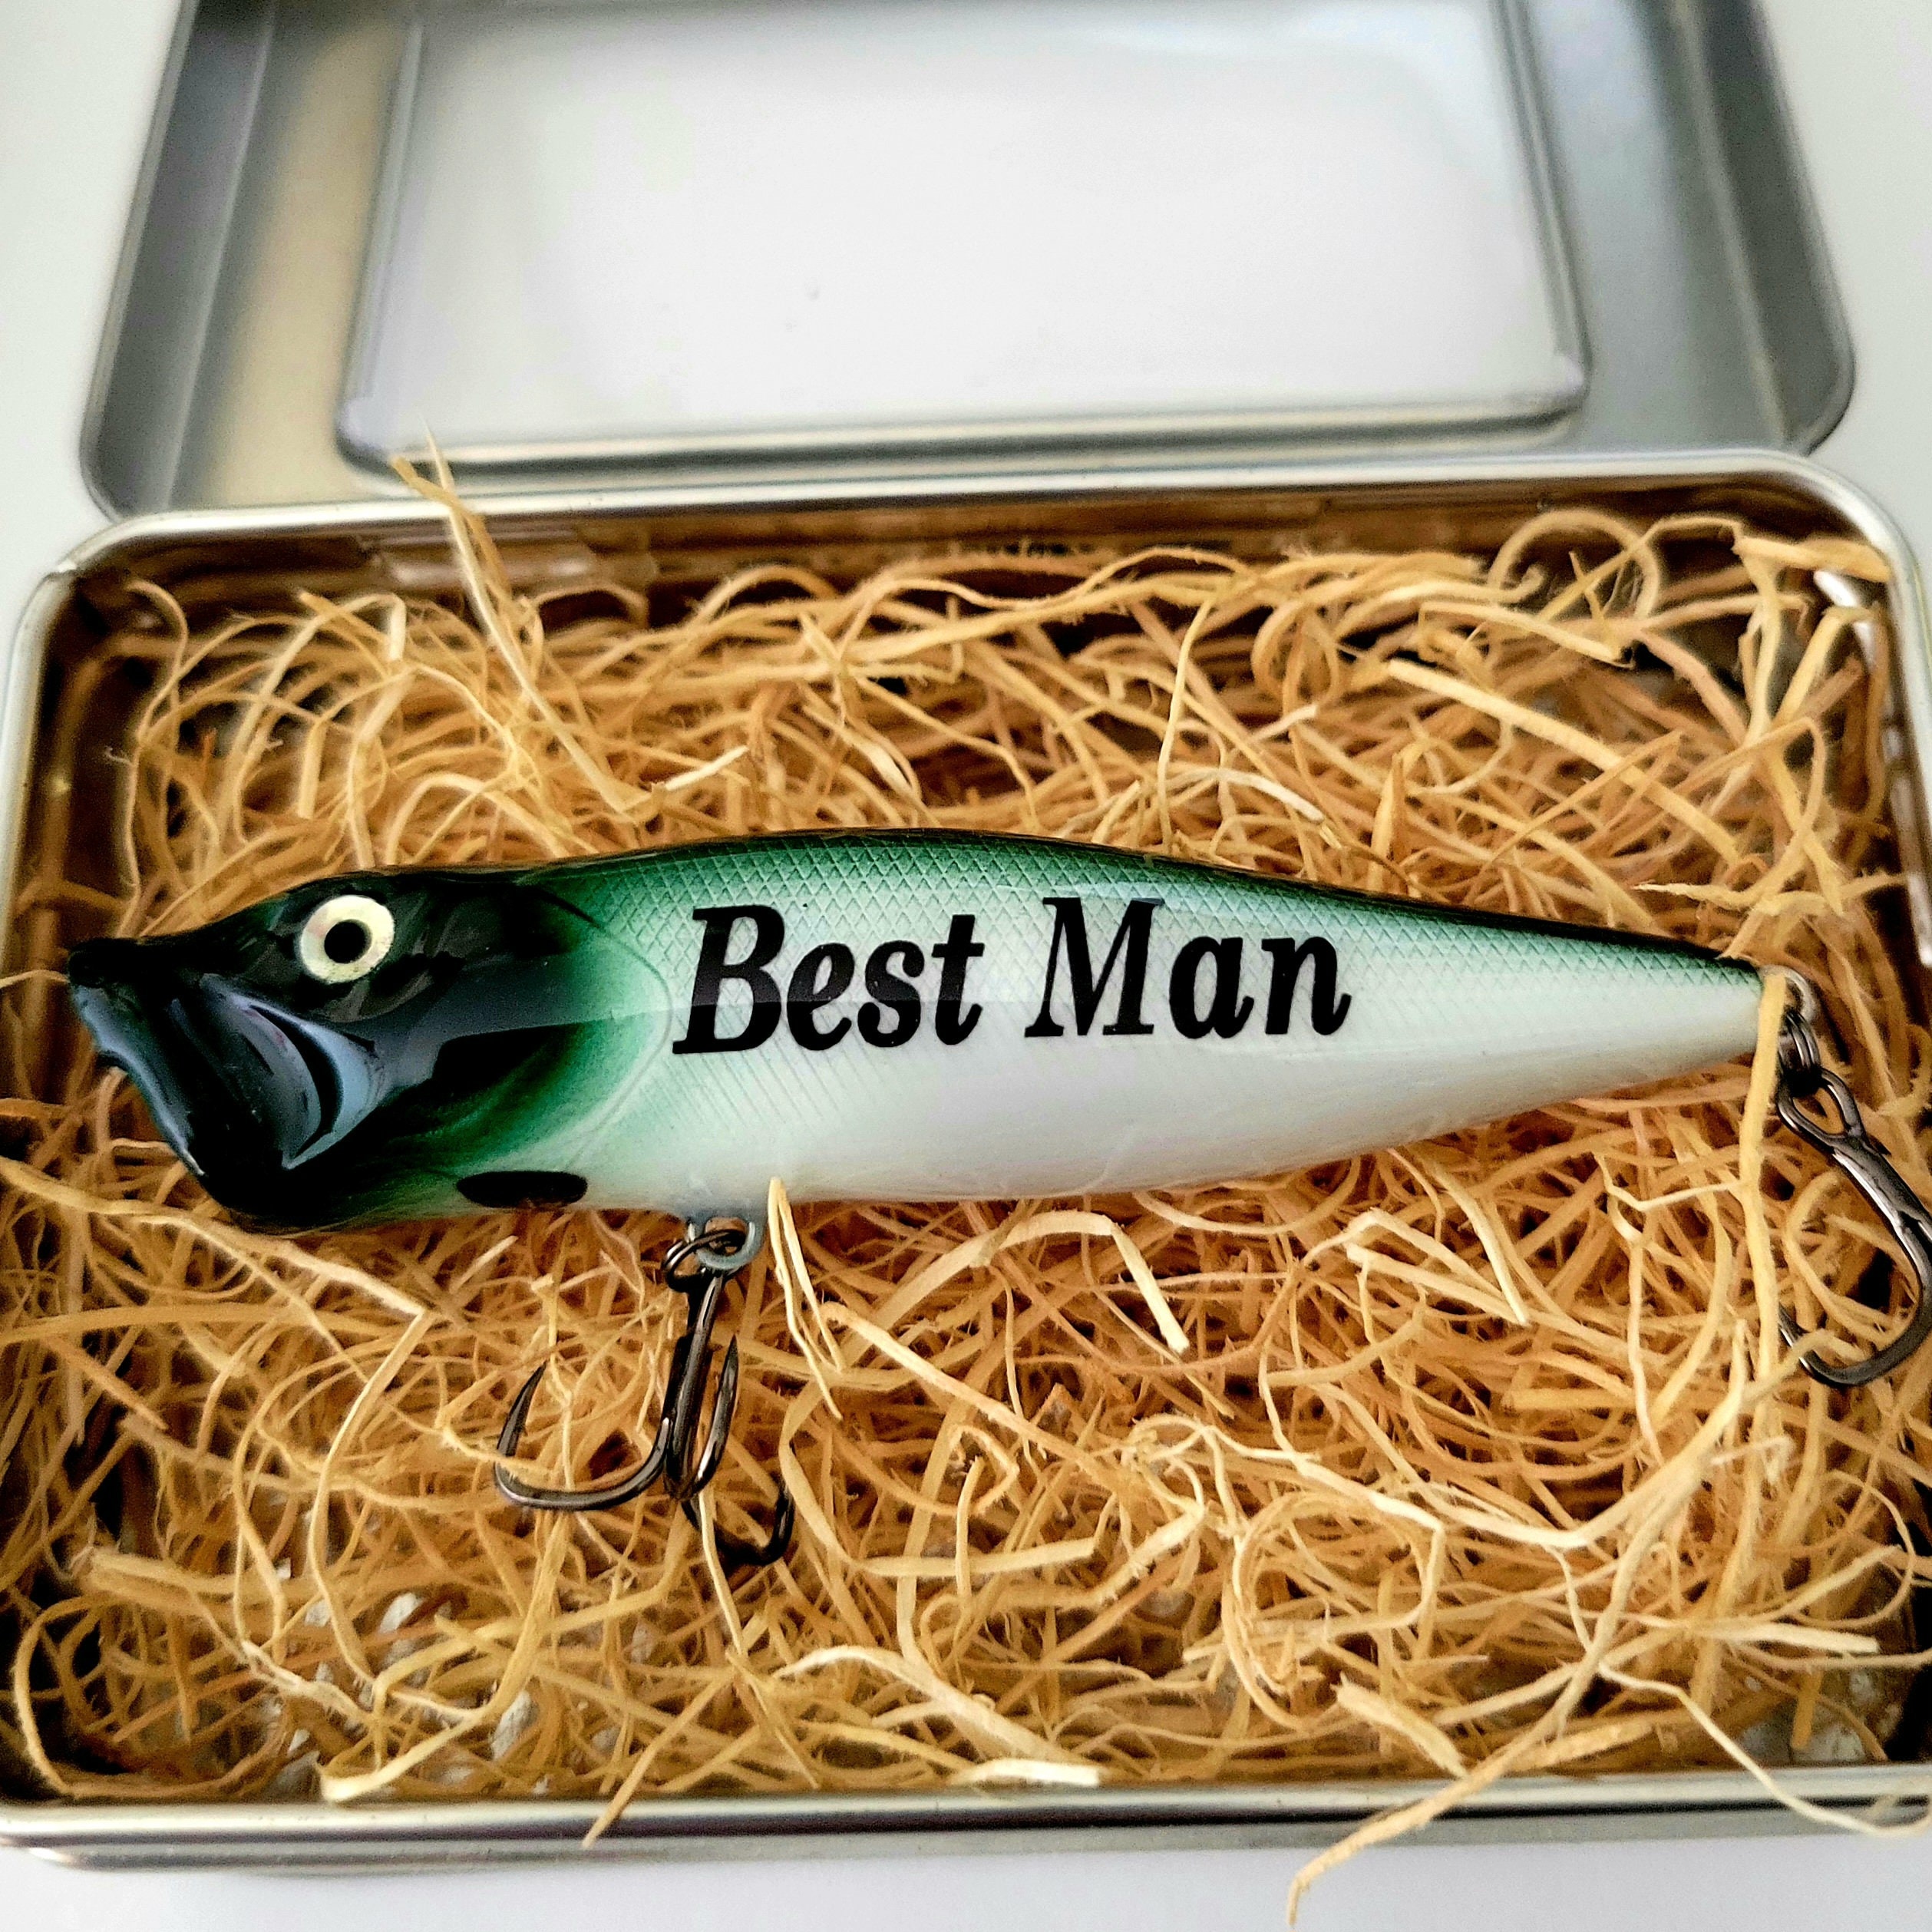 Personalized Fishing Lure for Your Best Man Proposal Gift Wedding Party  Proposal Gifts Custom Made and One of a Kind Best Man Gift 